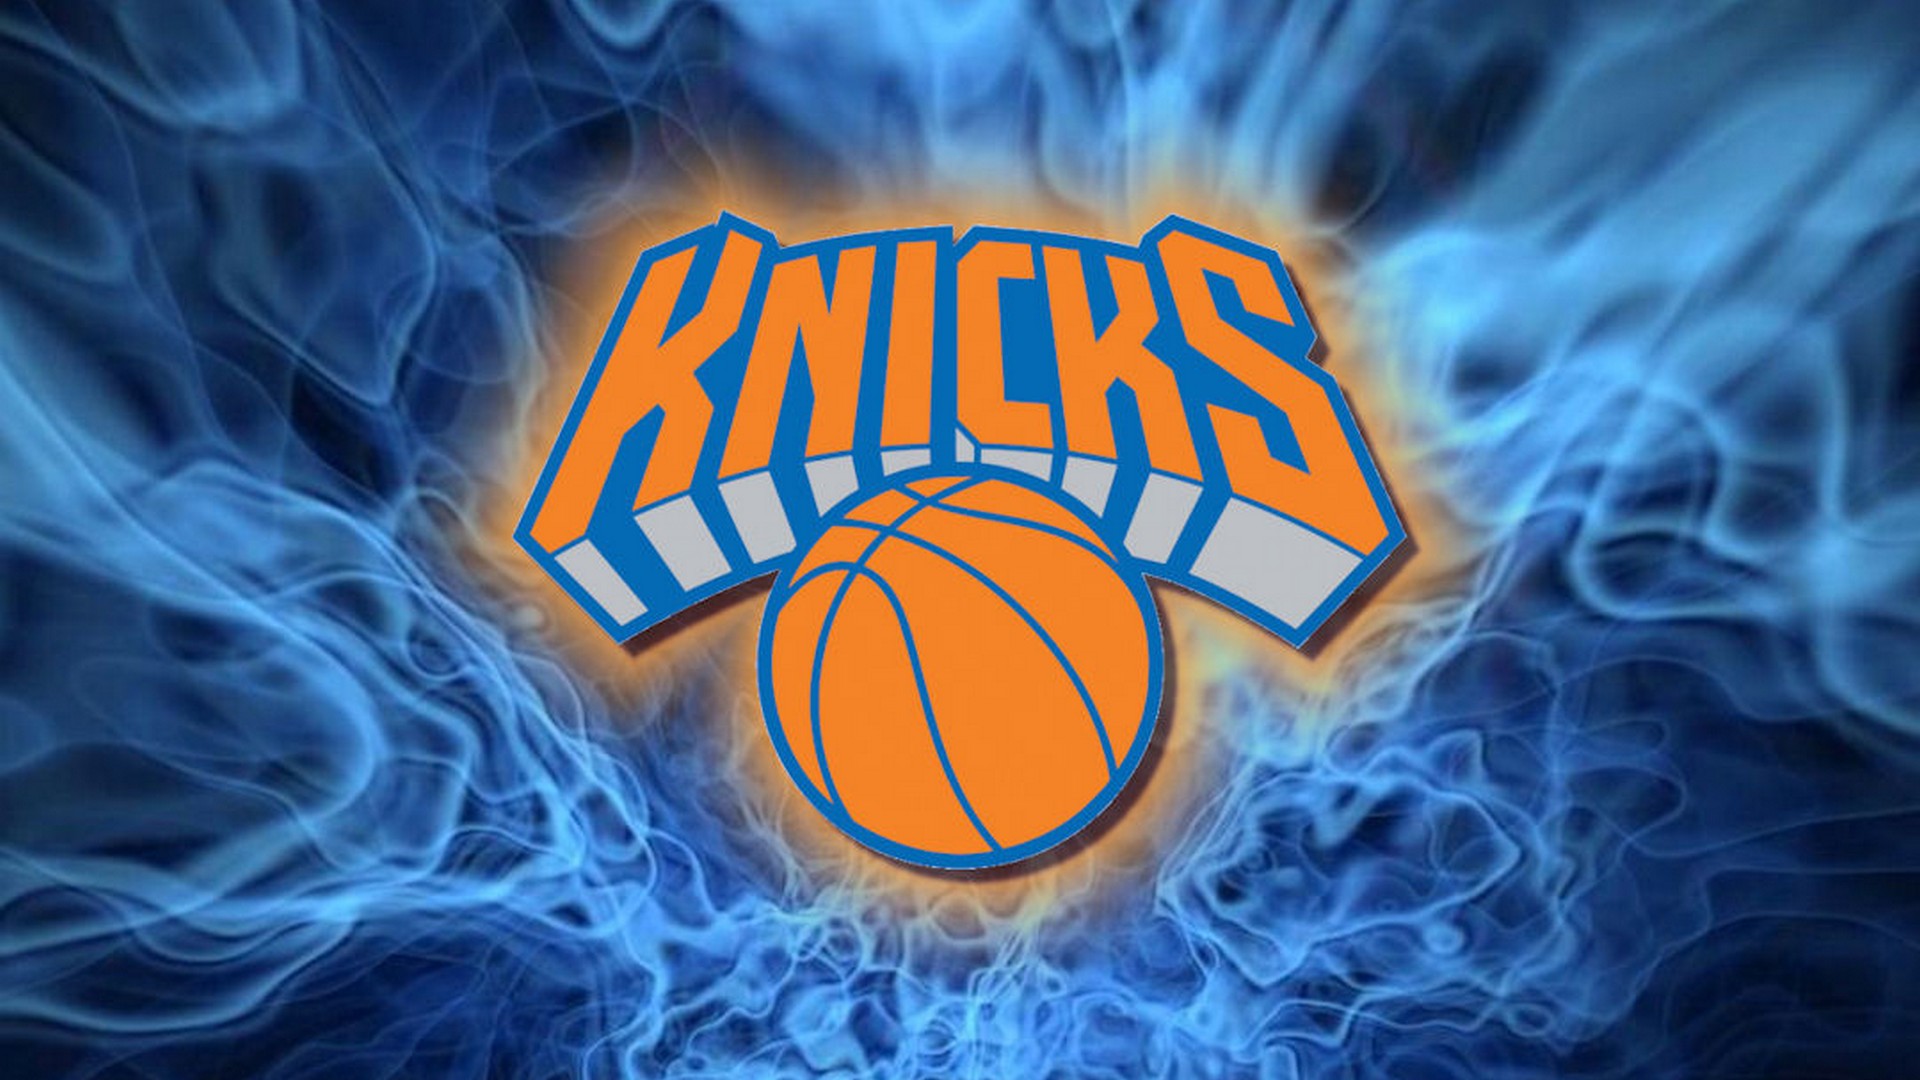 New York Knicks Wallpaper with image dimensions 1920x1080 pixel. You can make this wallpaper for your Desktop Computer Backgrounds, Windows or Mac Screensavers, iPhone Lock screen, Tablet or Android and another Mobile Phone device